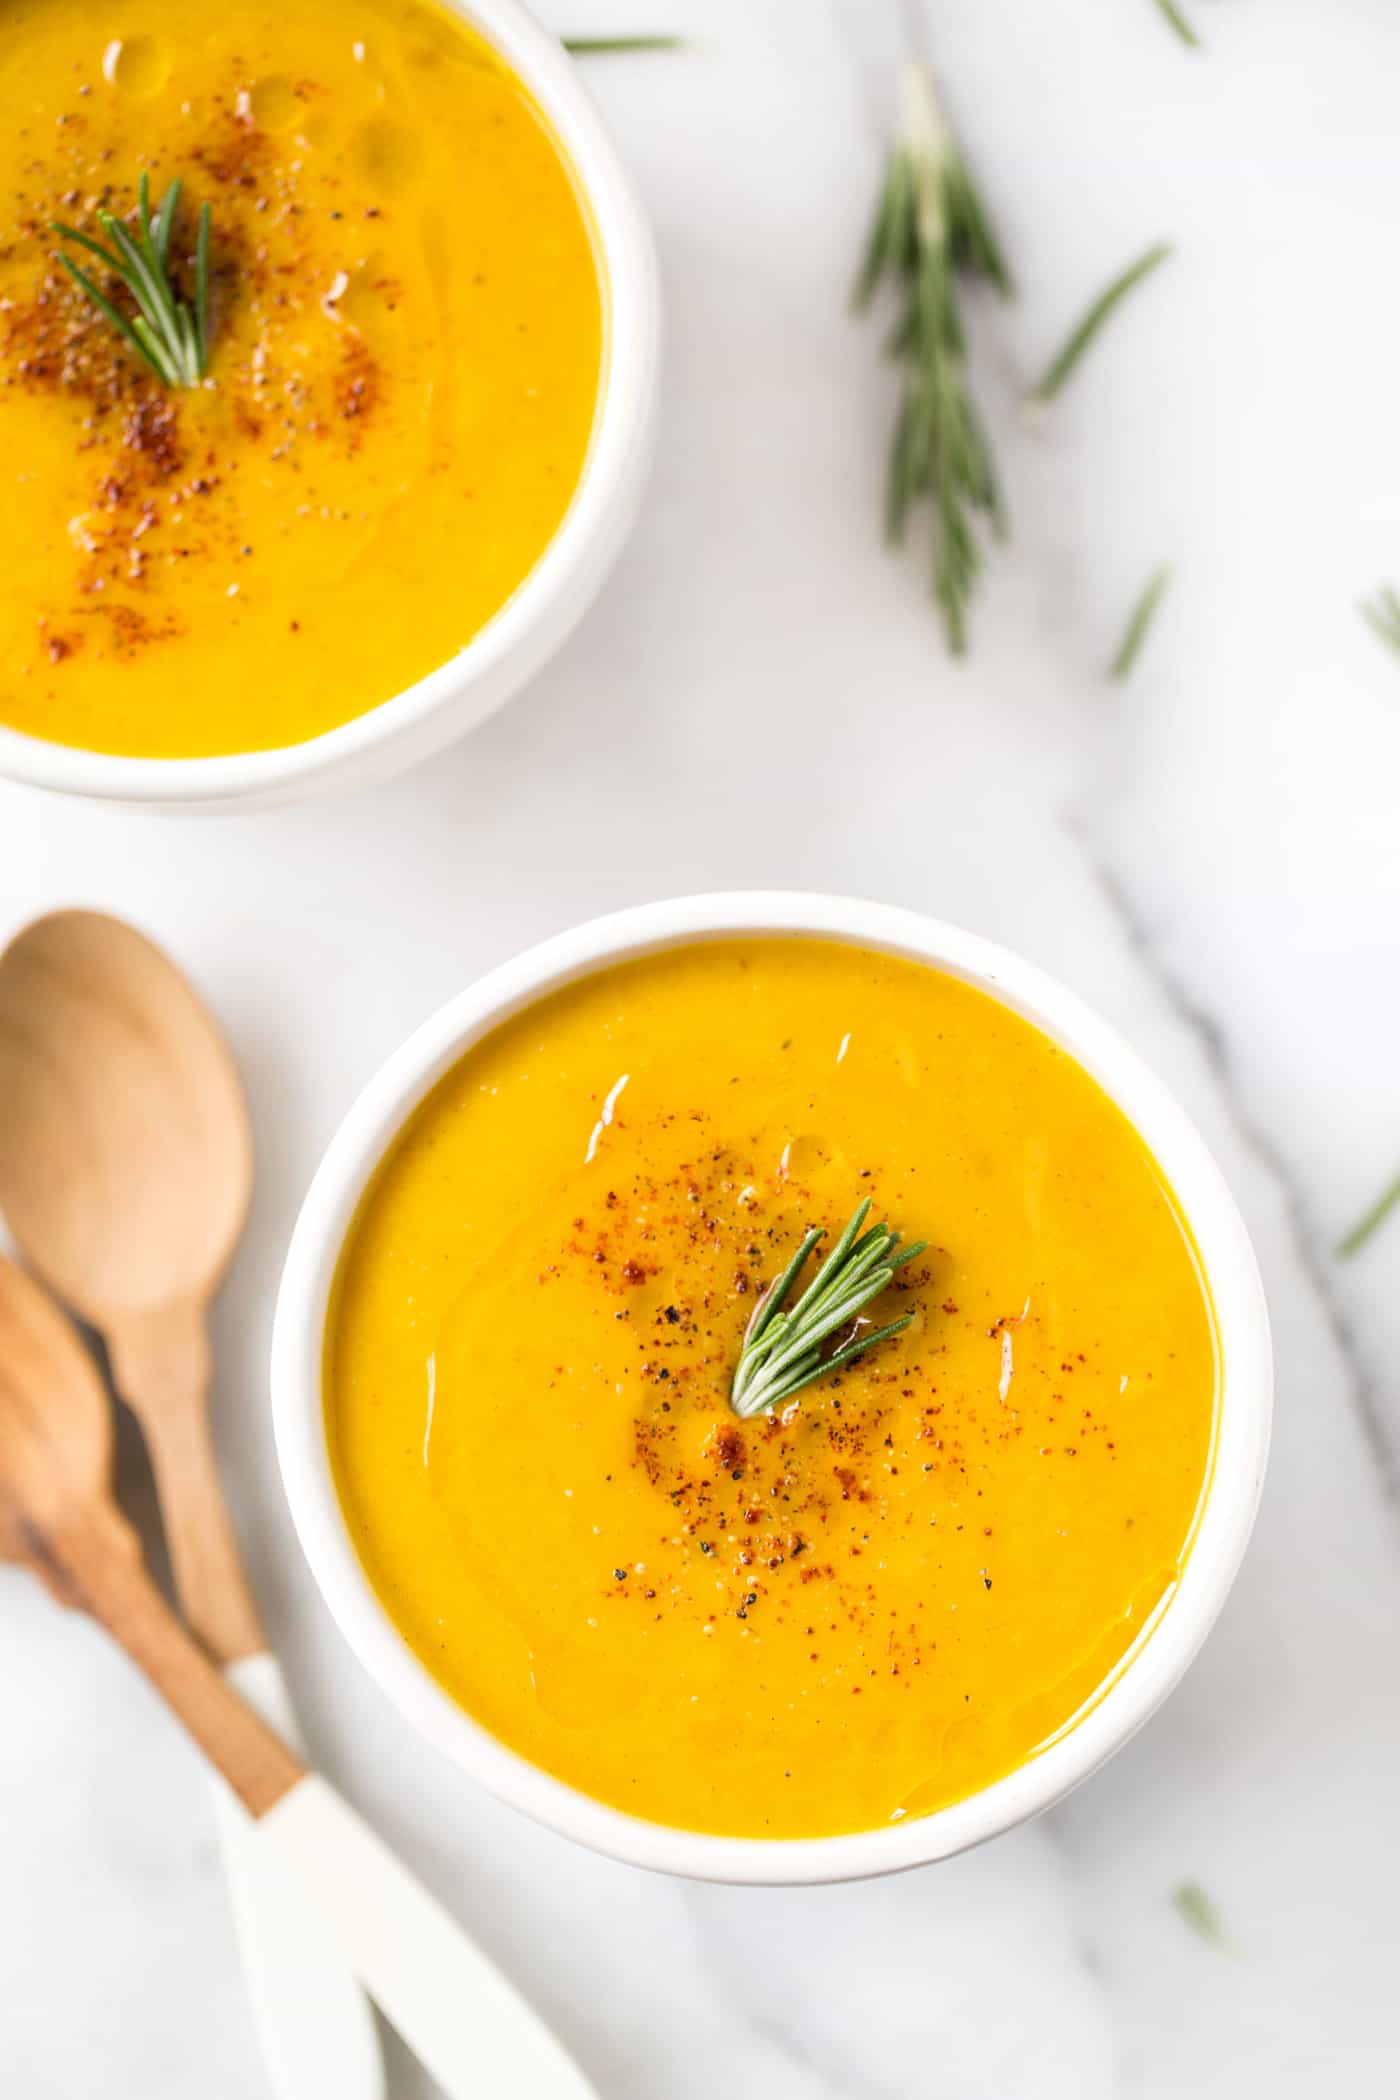 Two bowls of squash soup topped with olive oil, cracked black pepper, and fresh rosemary, with wooden spoons and rosemary in the background